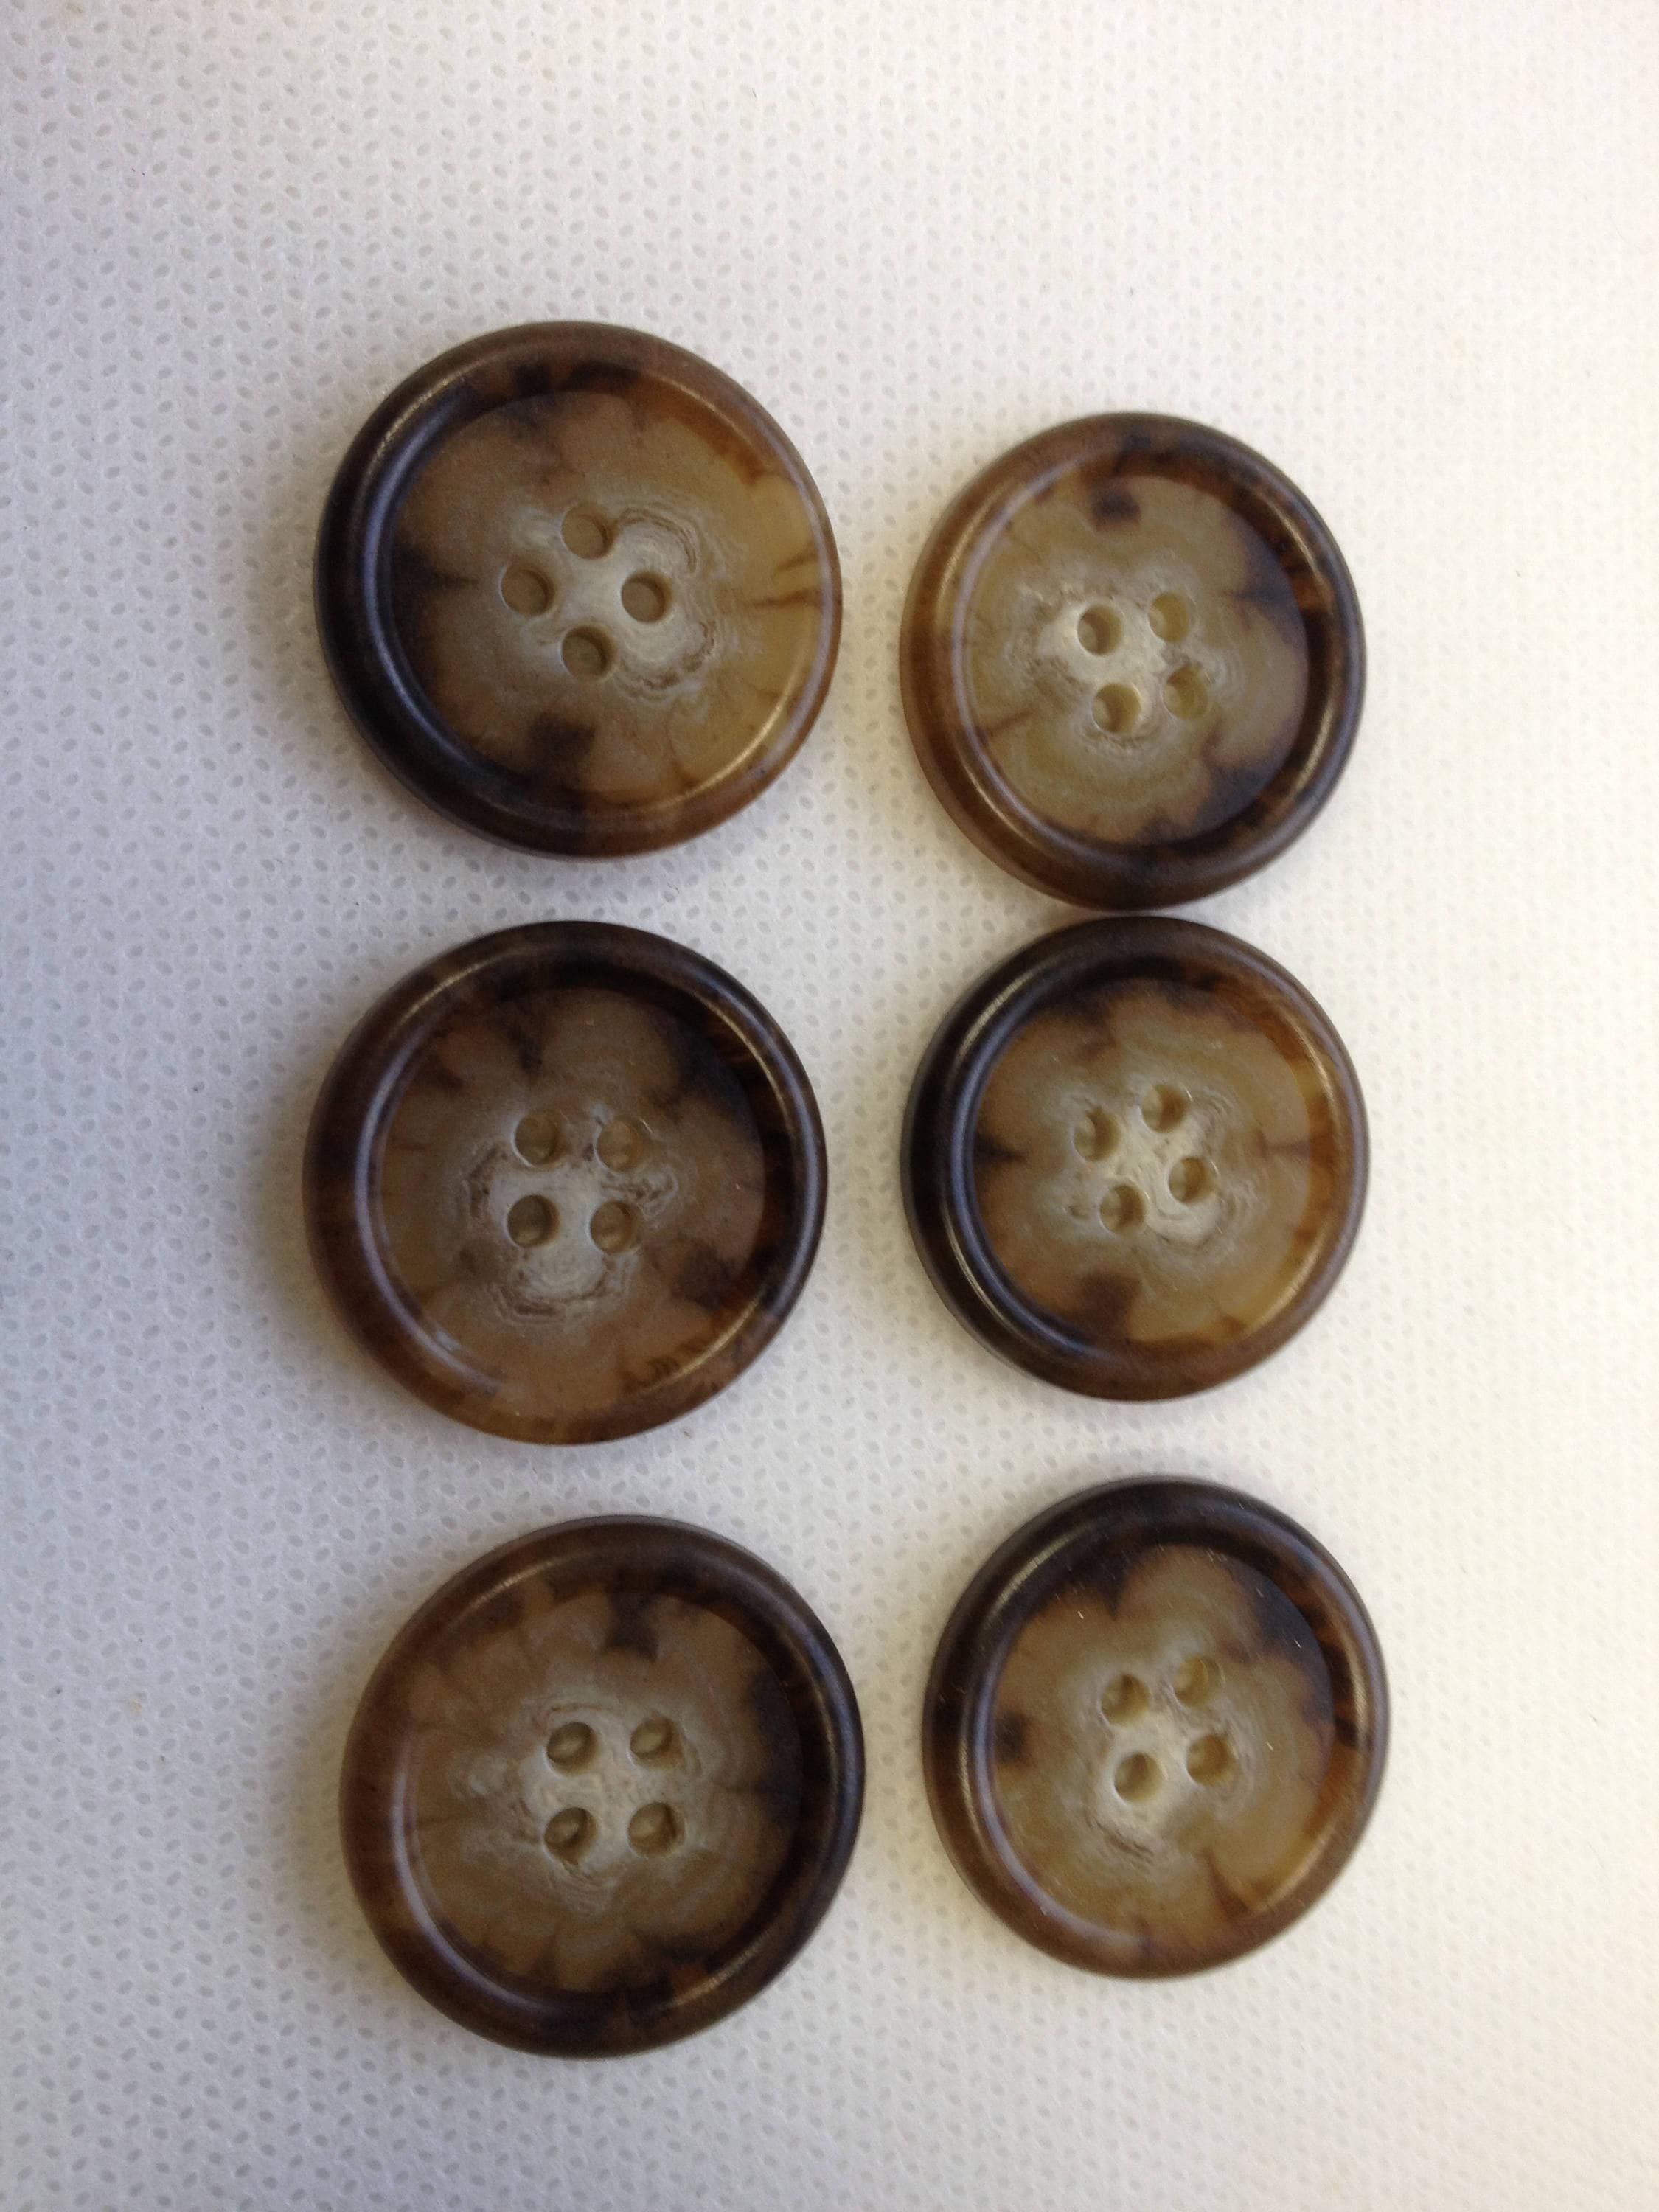 Traditional tan woven leather buttons, 6 sizes